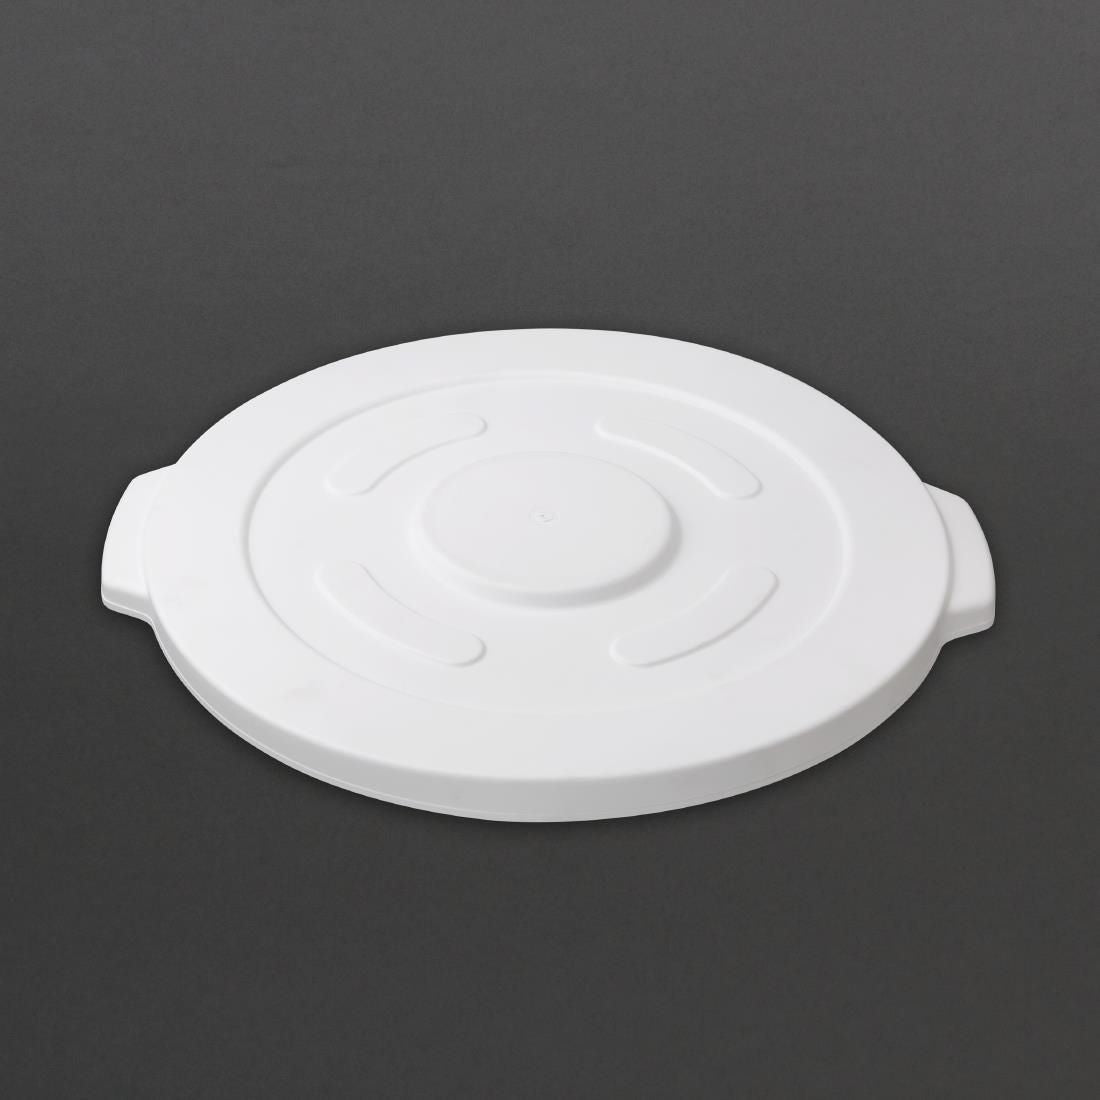 GG796 Vogue Polypropylene Round Container Bin Lid Large JD Catering Equipment Solutions Ltd